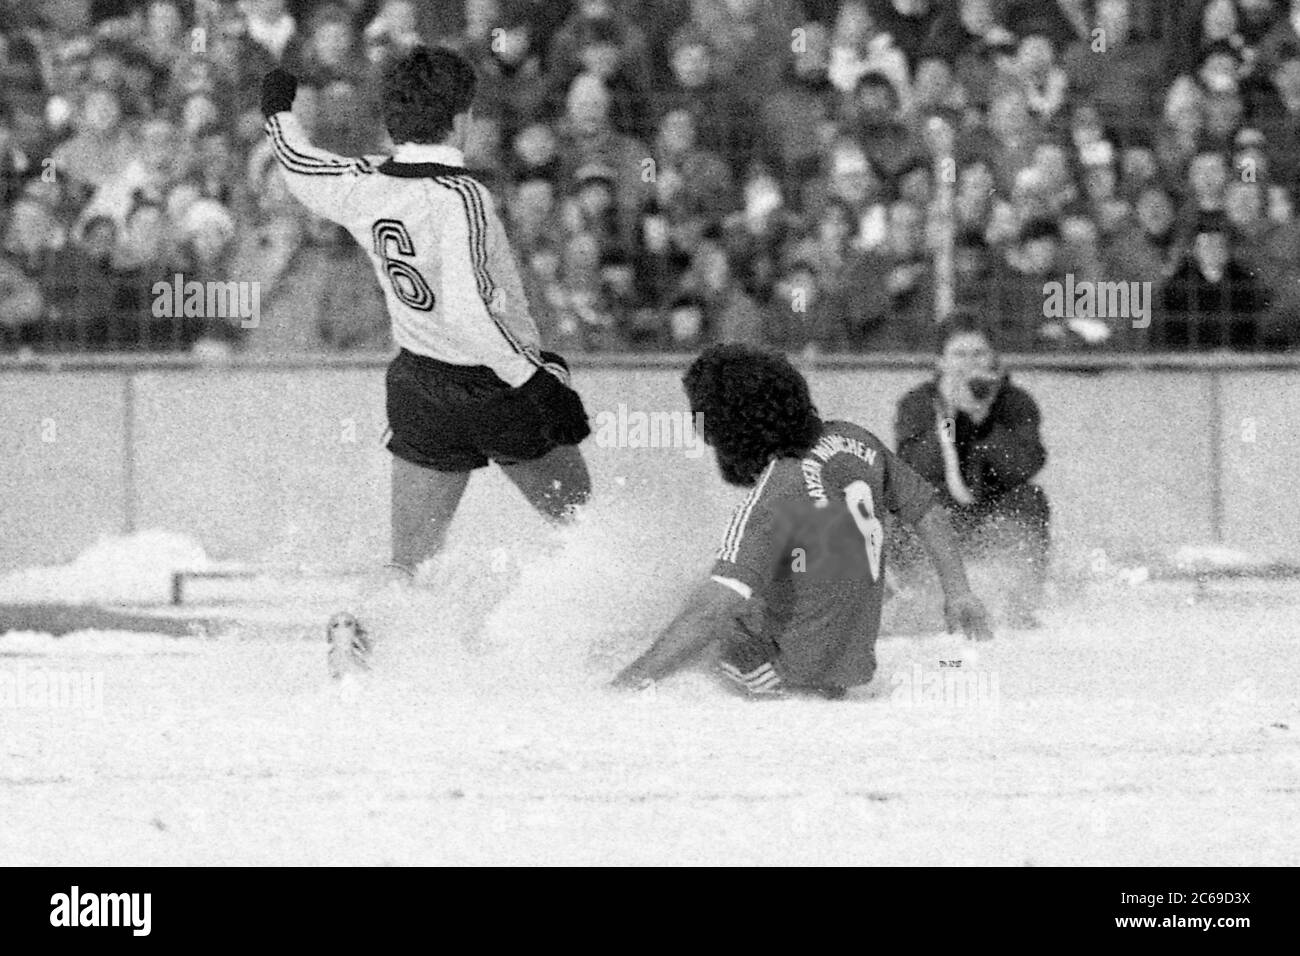 Paul BREITNER (M) grazes on the snow floor versus a Bayreuth player; photographed from behind; Snow, winter, action, game scene; Soccer DFB Pokal SpVgg Bayreuth (BT) - FC Bayern Munich (M) 1-0, on 12.01.1980 in Bayreuth/Germany. | usage worldwide Stock Photo